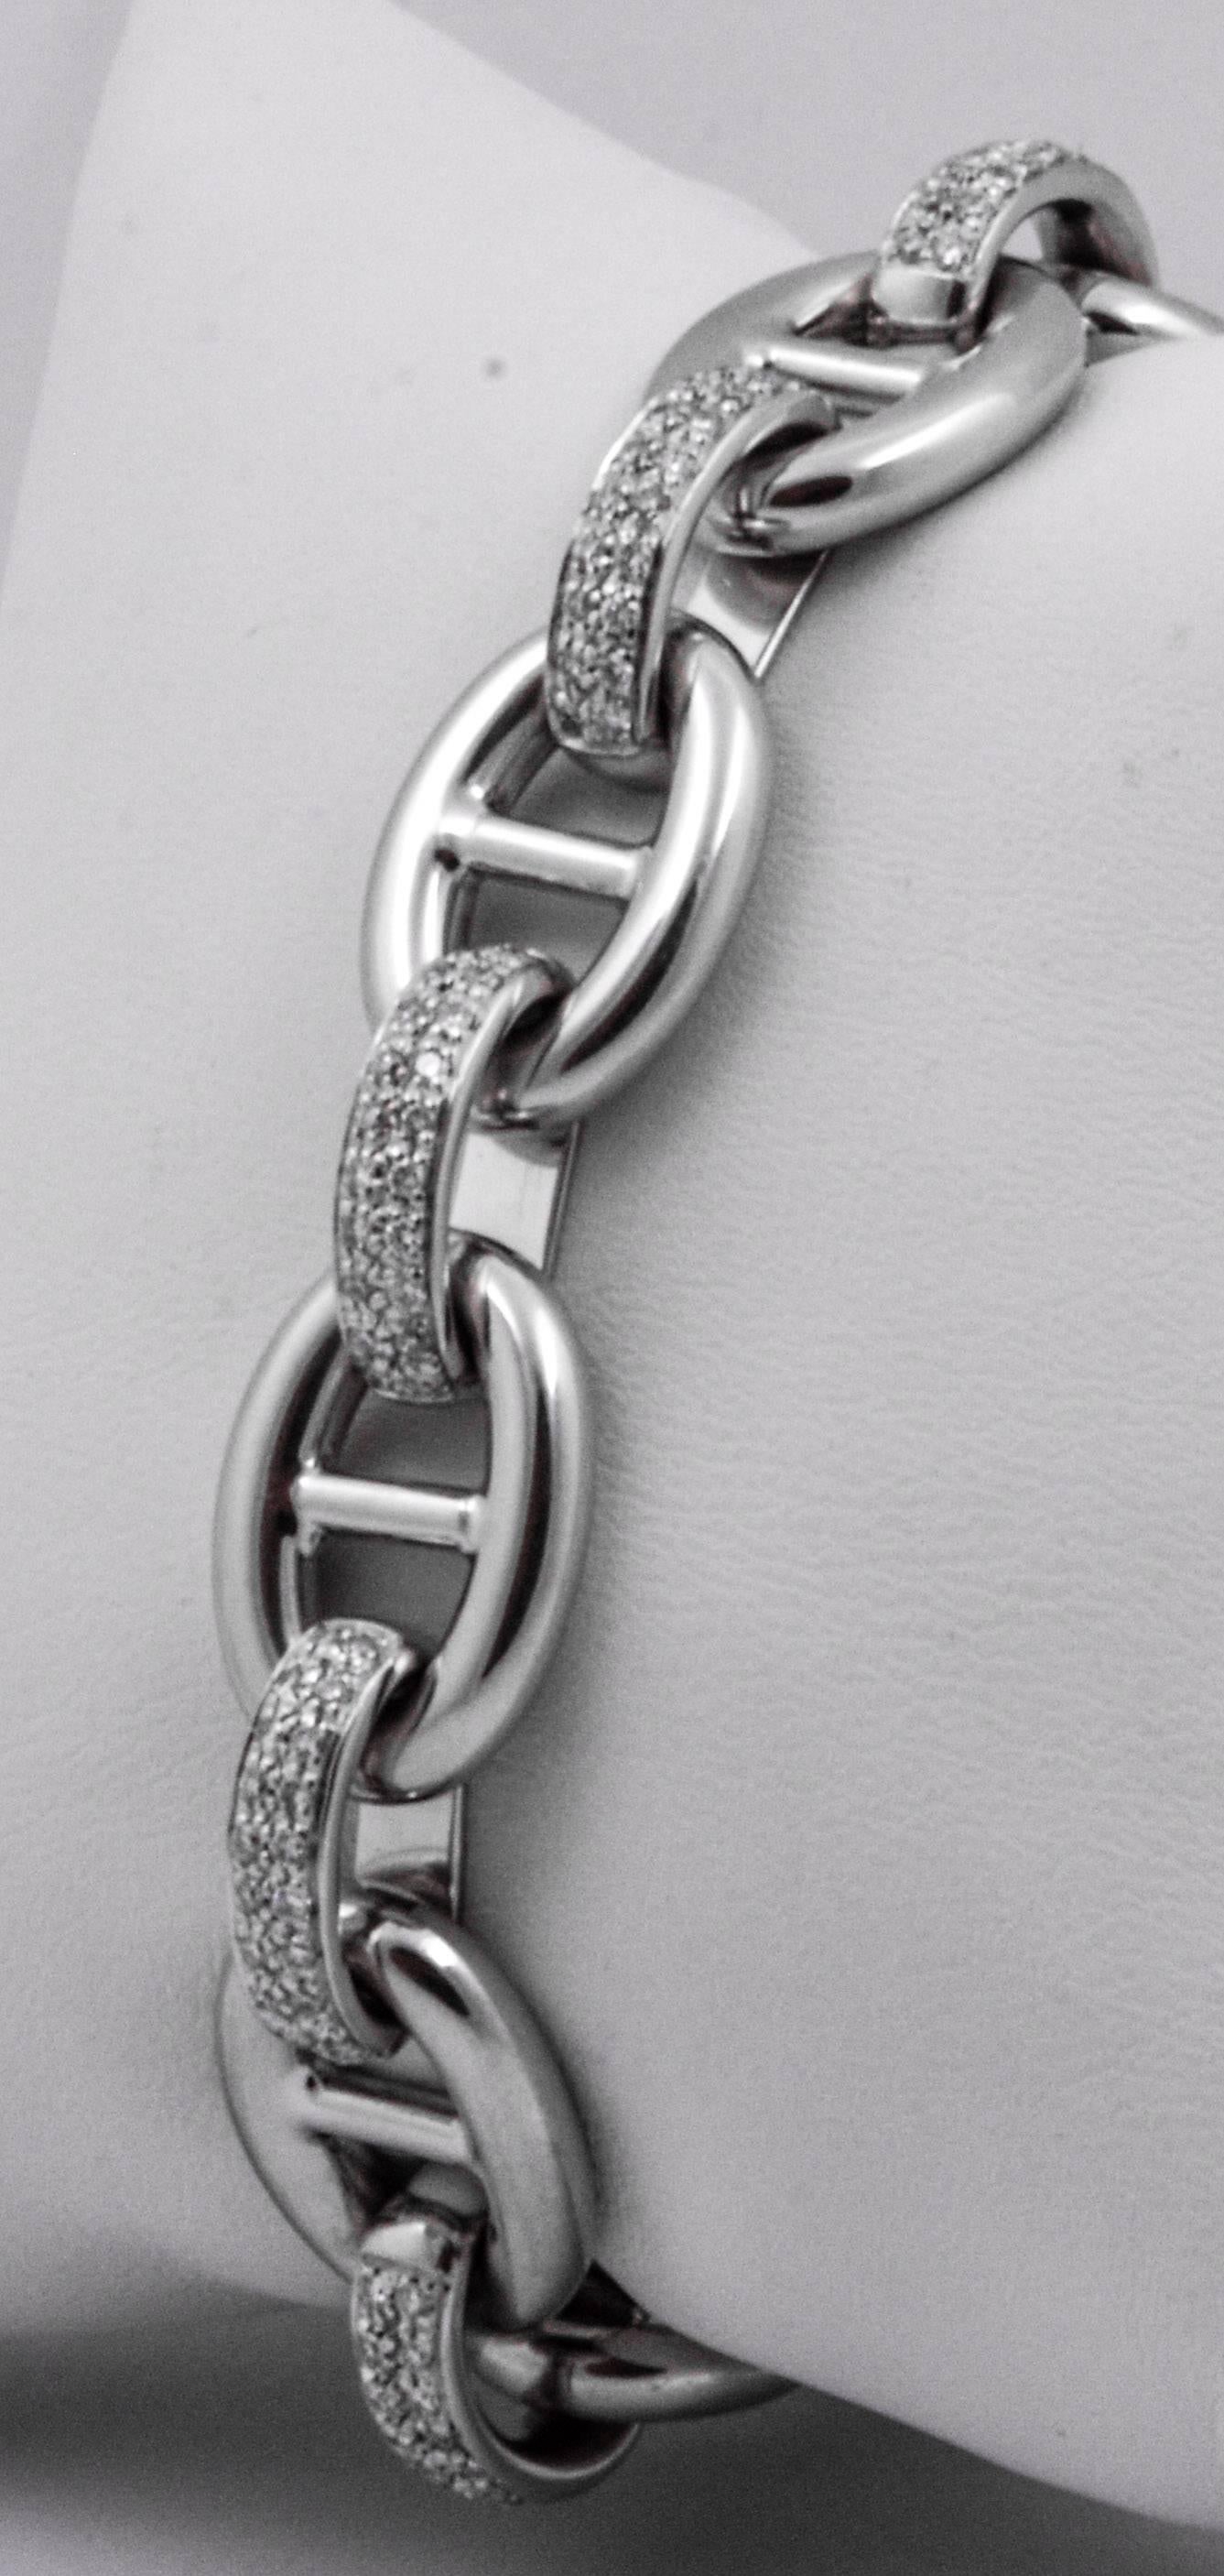 This classic 18kt white gold bracelet features 140 round, brilliant-cut diamonds. Alternating between lovely anchor links covered in pave set diamonds and polished anchor links, this bracelet draws the eye with its sparkle and grace. The diamonds